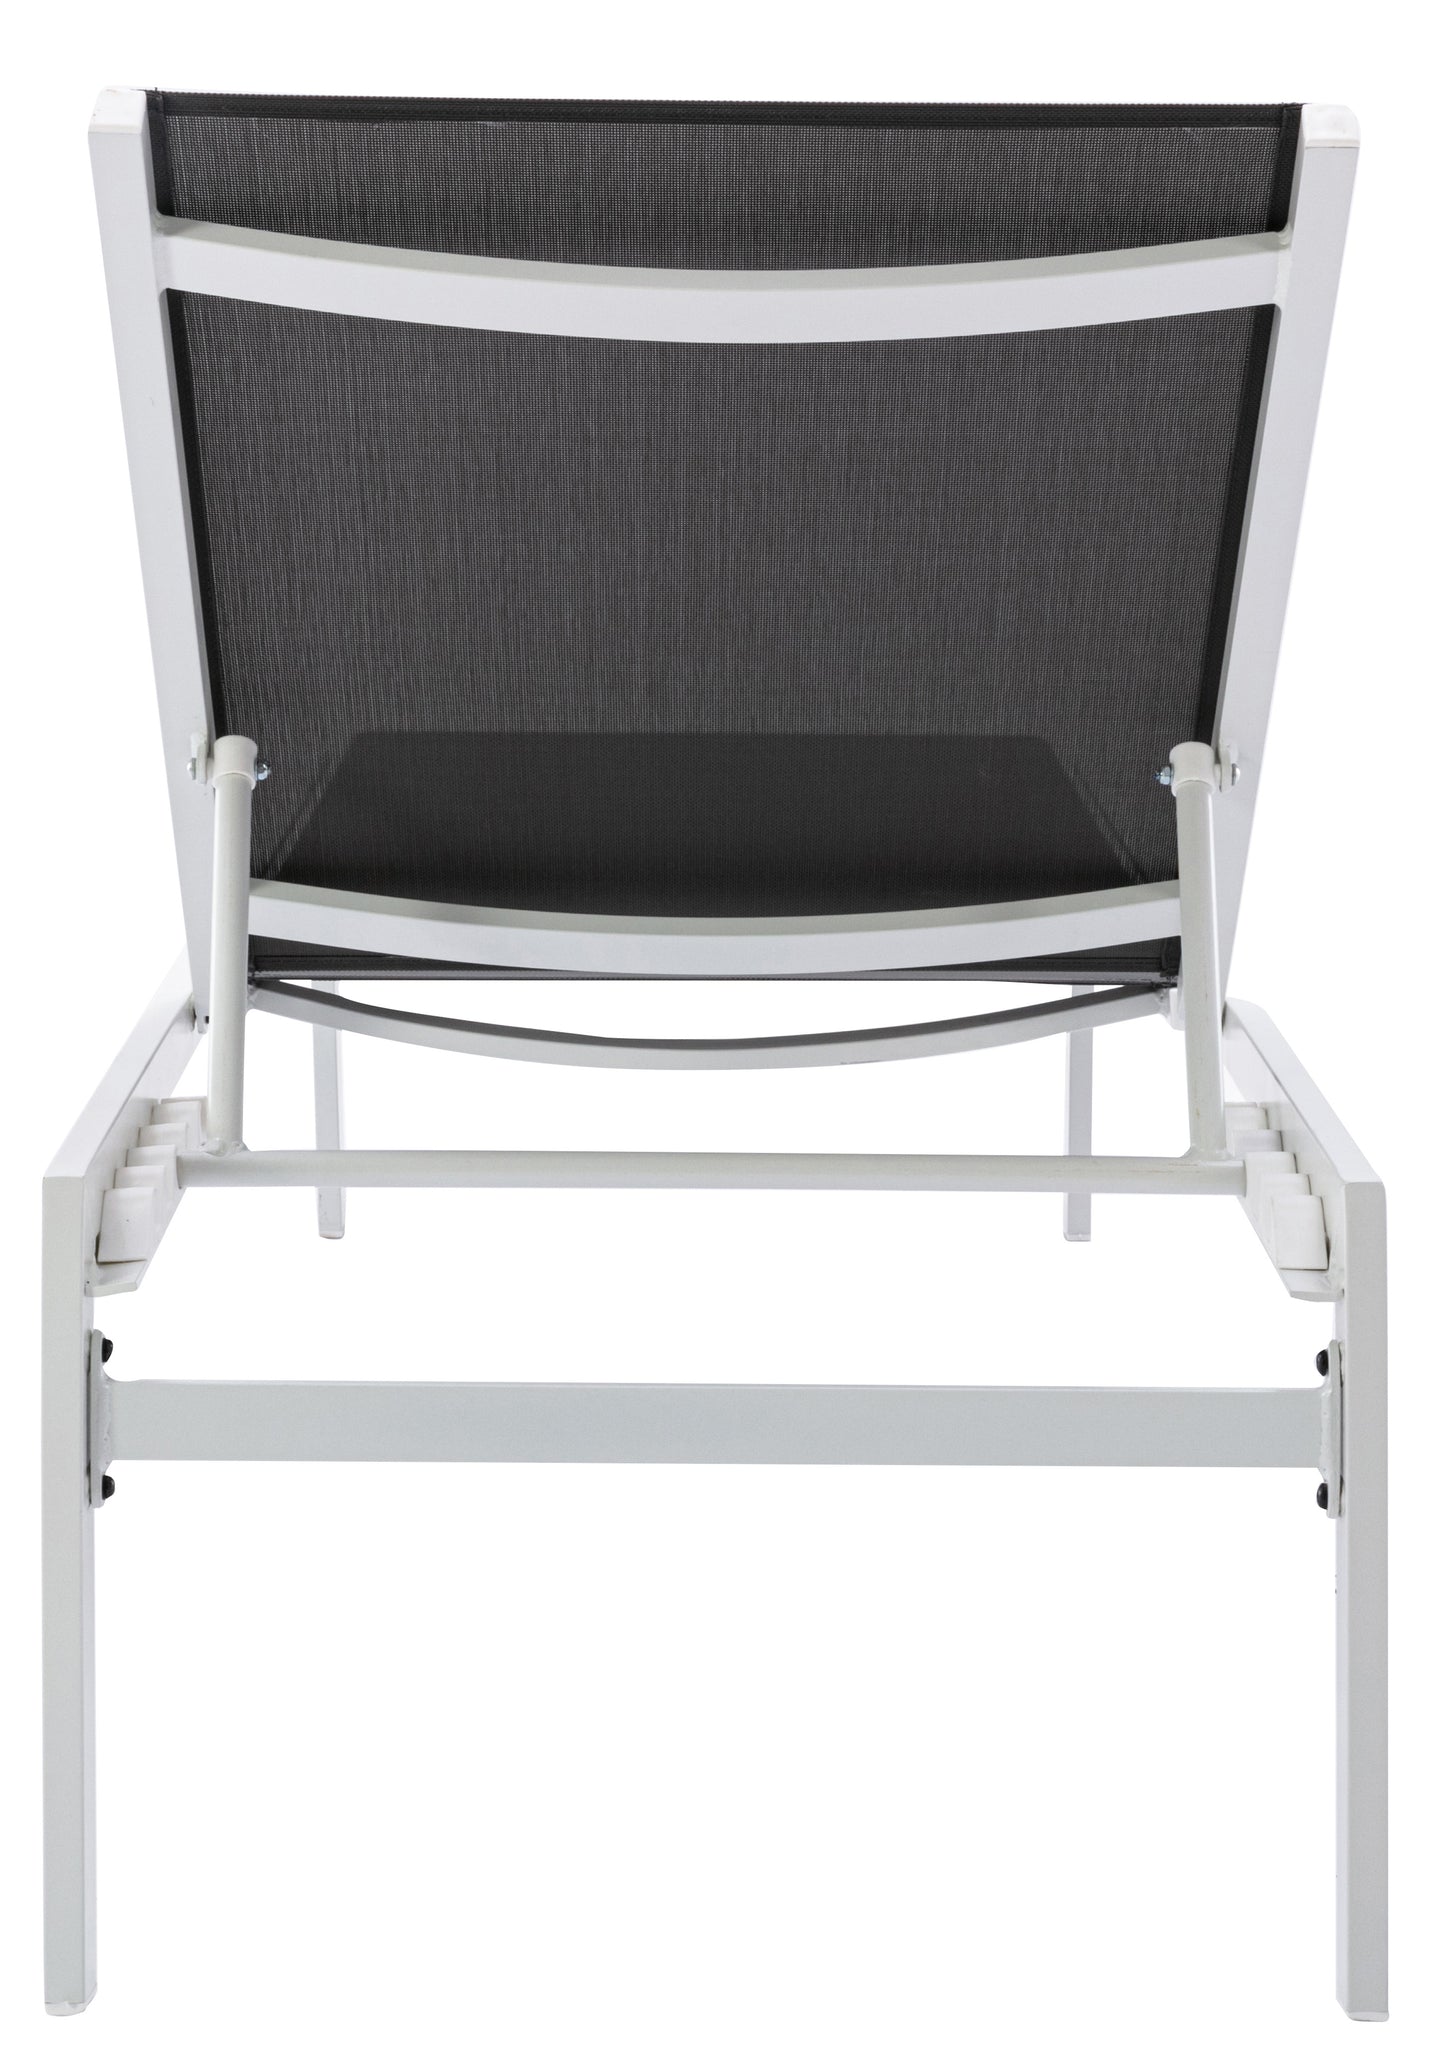 cole grey resilient mesh water resistant fabric outdoor patio aluminum mesh chaise lounge chair grey